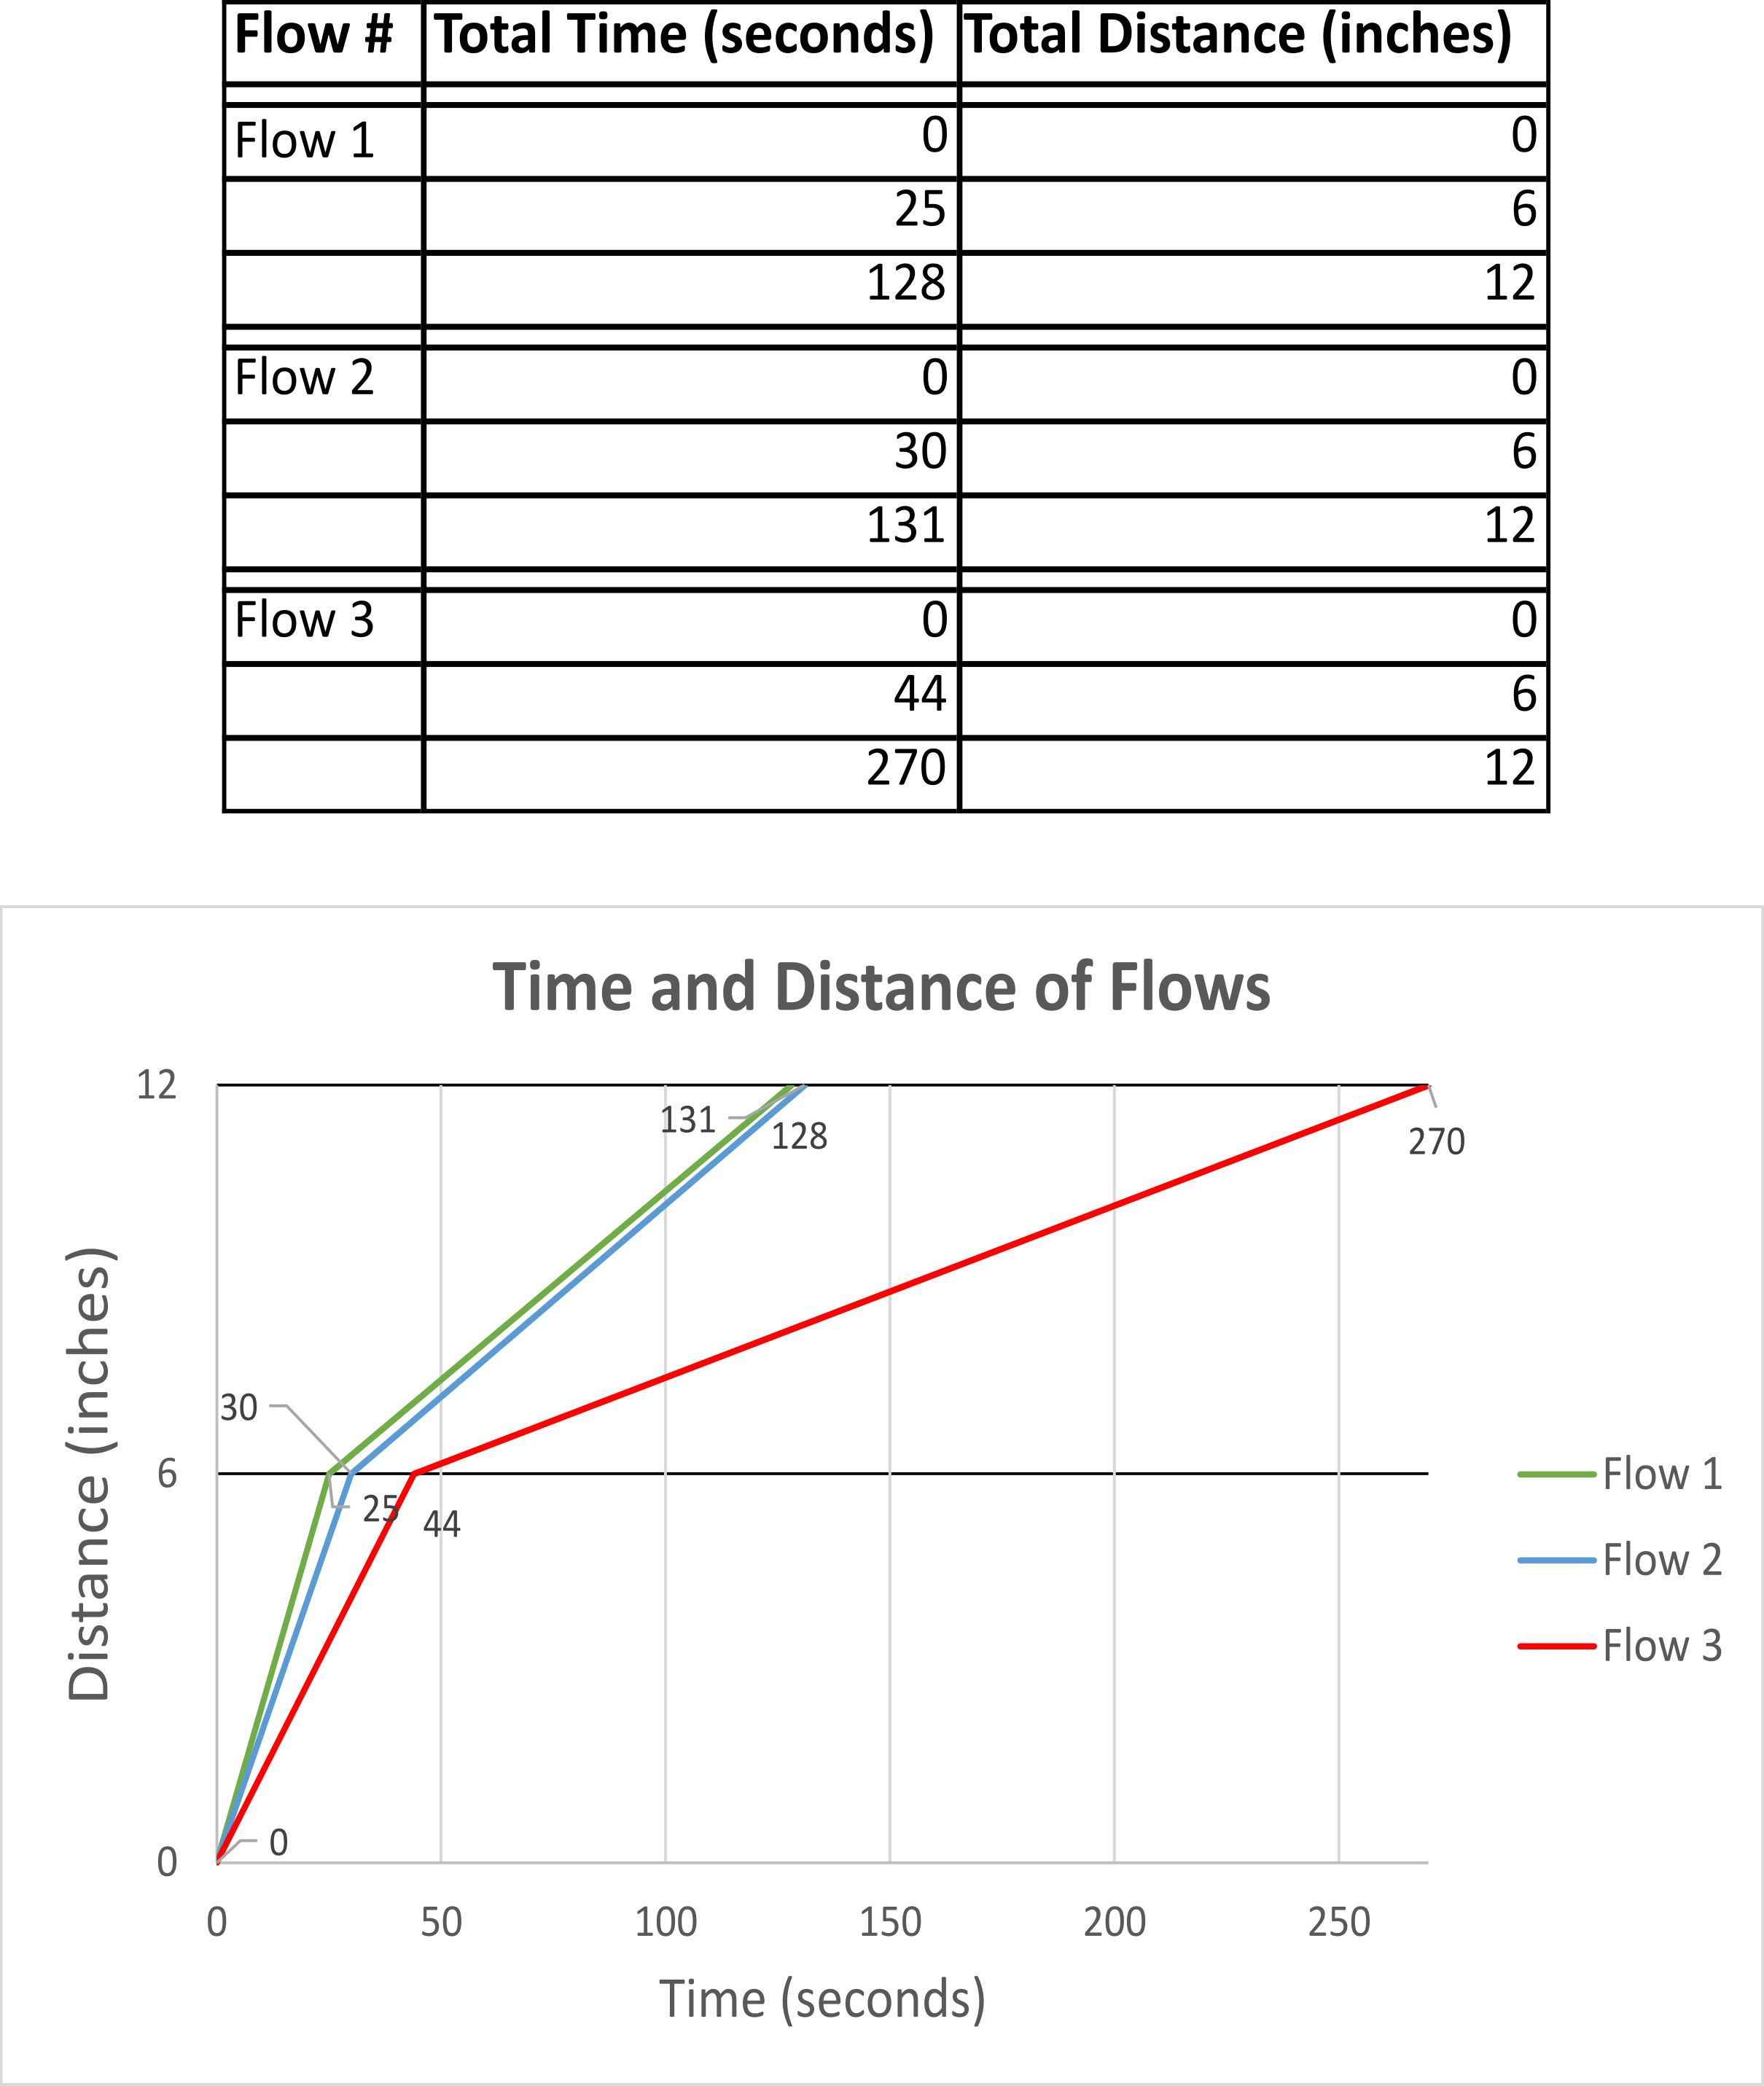 A table lists time (seconds) and distance (inches) of three flows, each starting at 0, 6, and ending at 12 inches. Below the table is a line graph showing three lines representing each flow plotted based on time and distance.